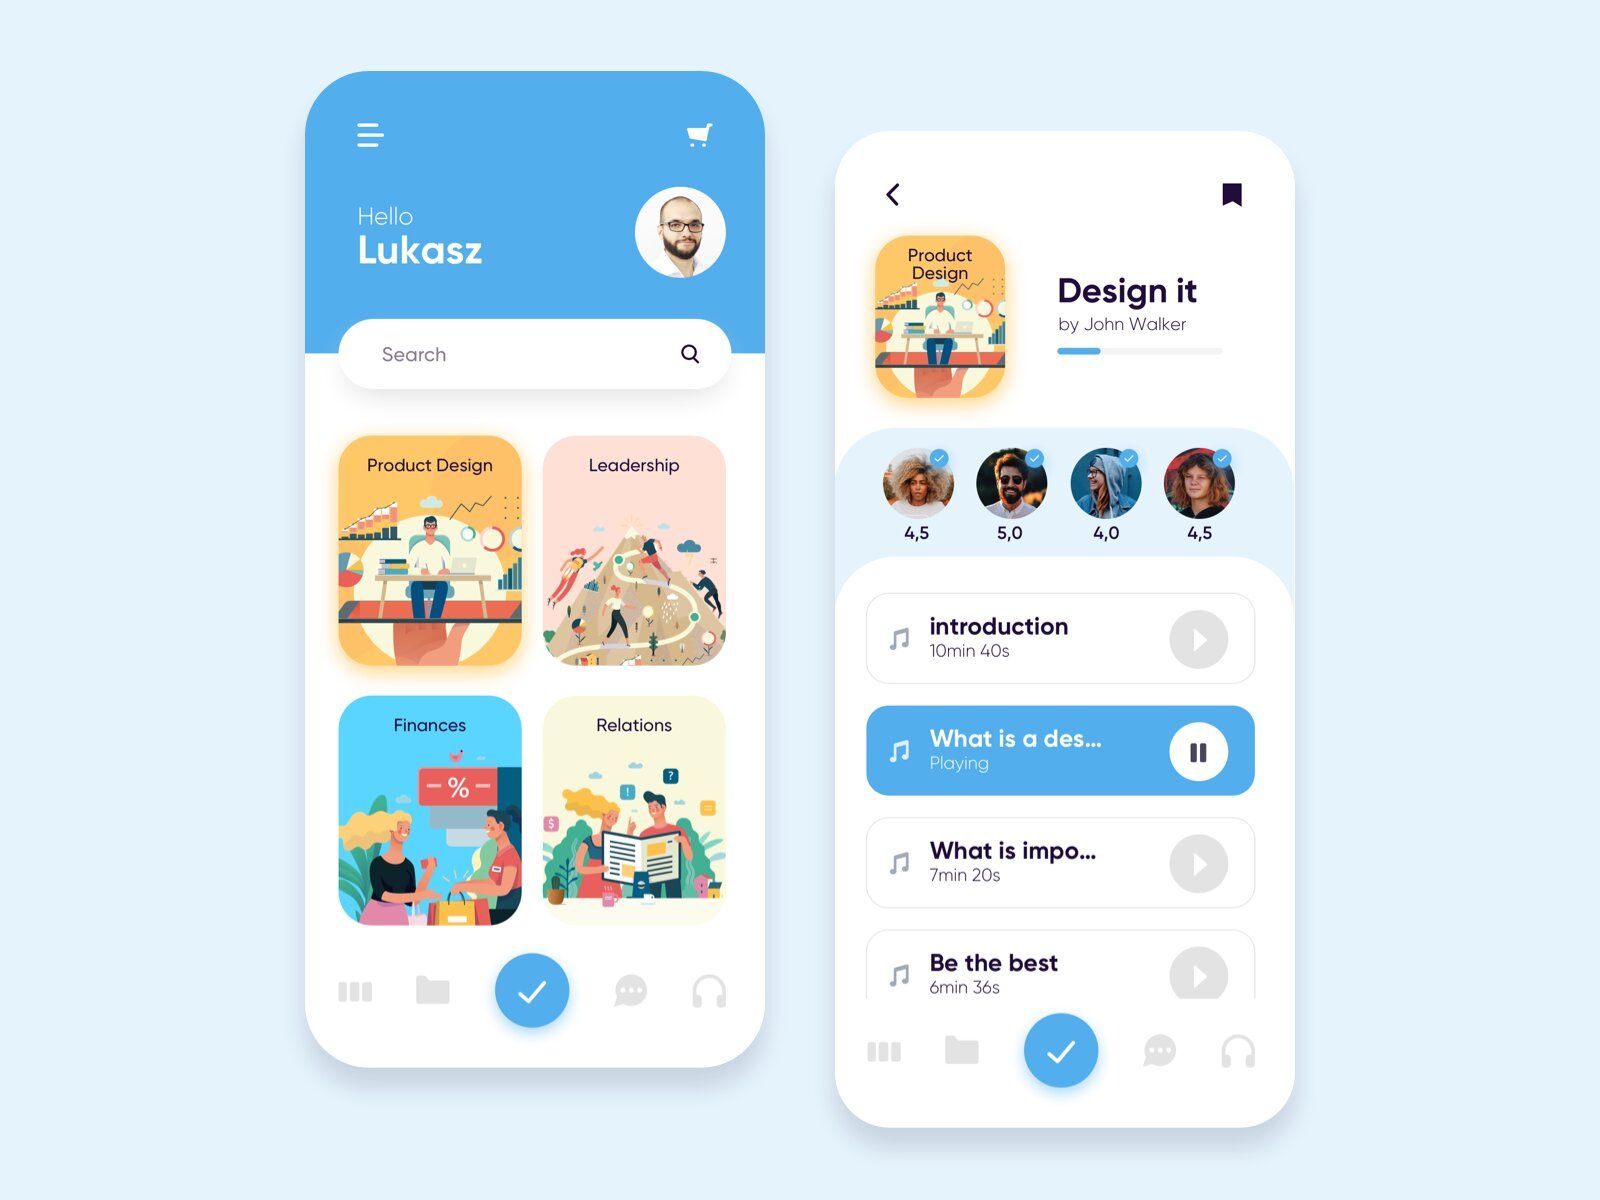 You can make a new course by complementing the existing content or freshening the info (*image by [Luke Gdyk](https://dribbble.com/gdylu){ rel="nofollow" .default-md}*)